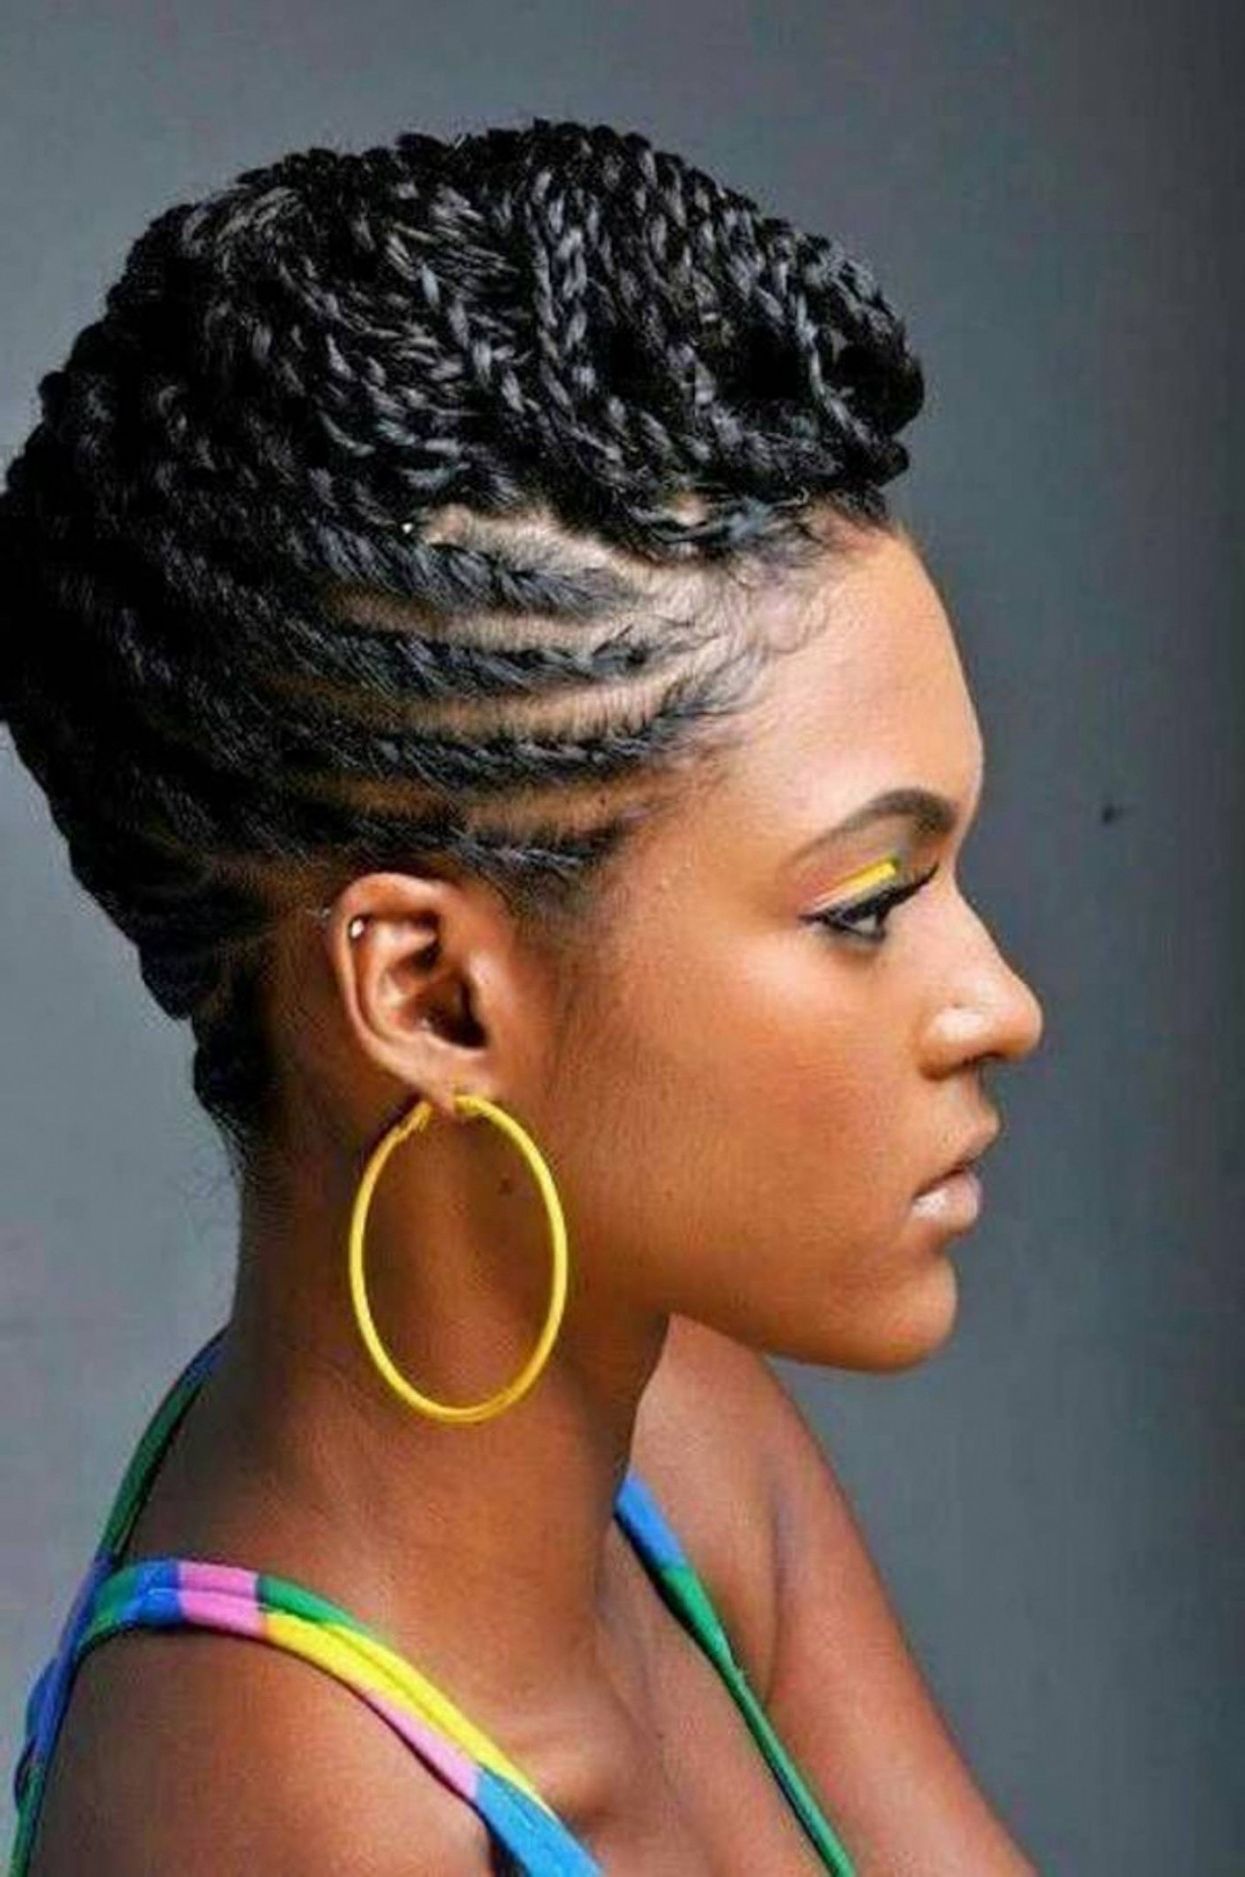 Hairstyles ~ 25 Updo Hairstyles For Black Women Black Natural Throughout Natural Black Updo Hairstyles (View 7 of 15)